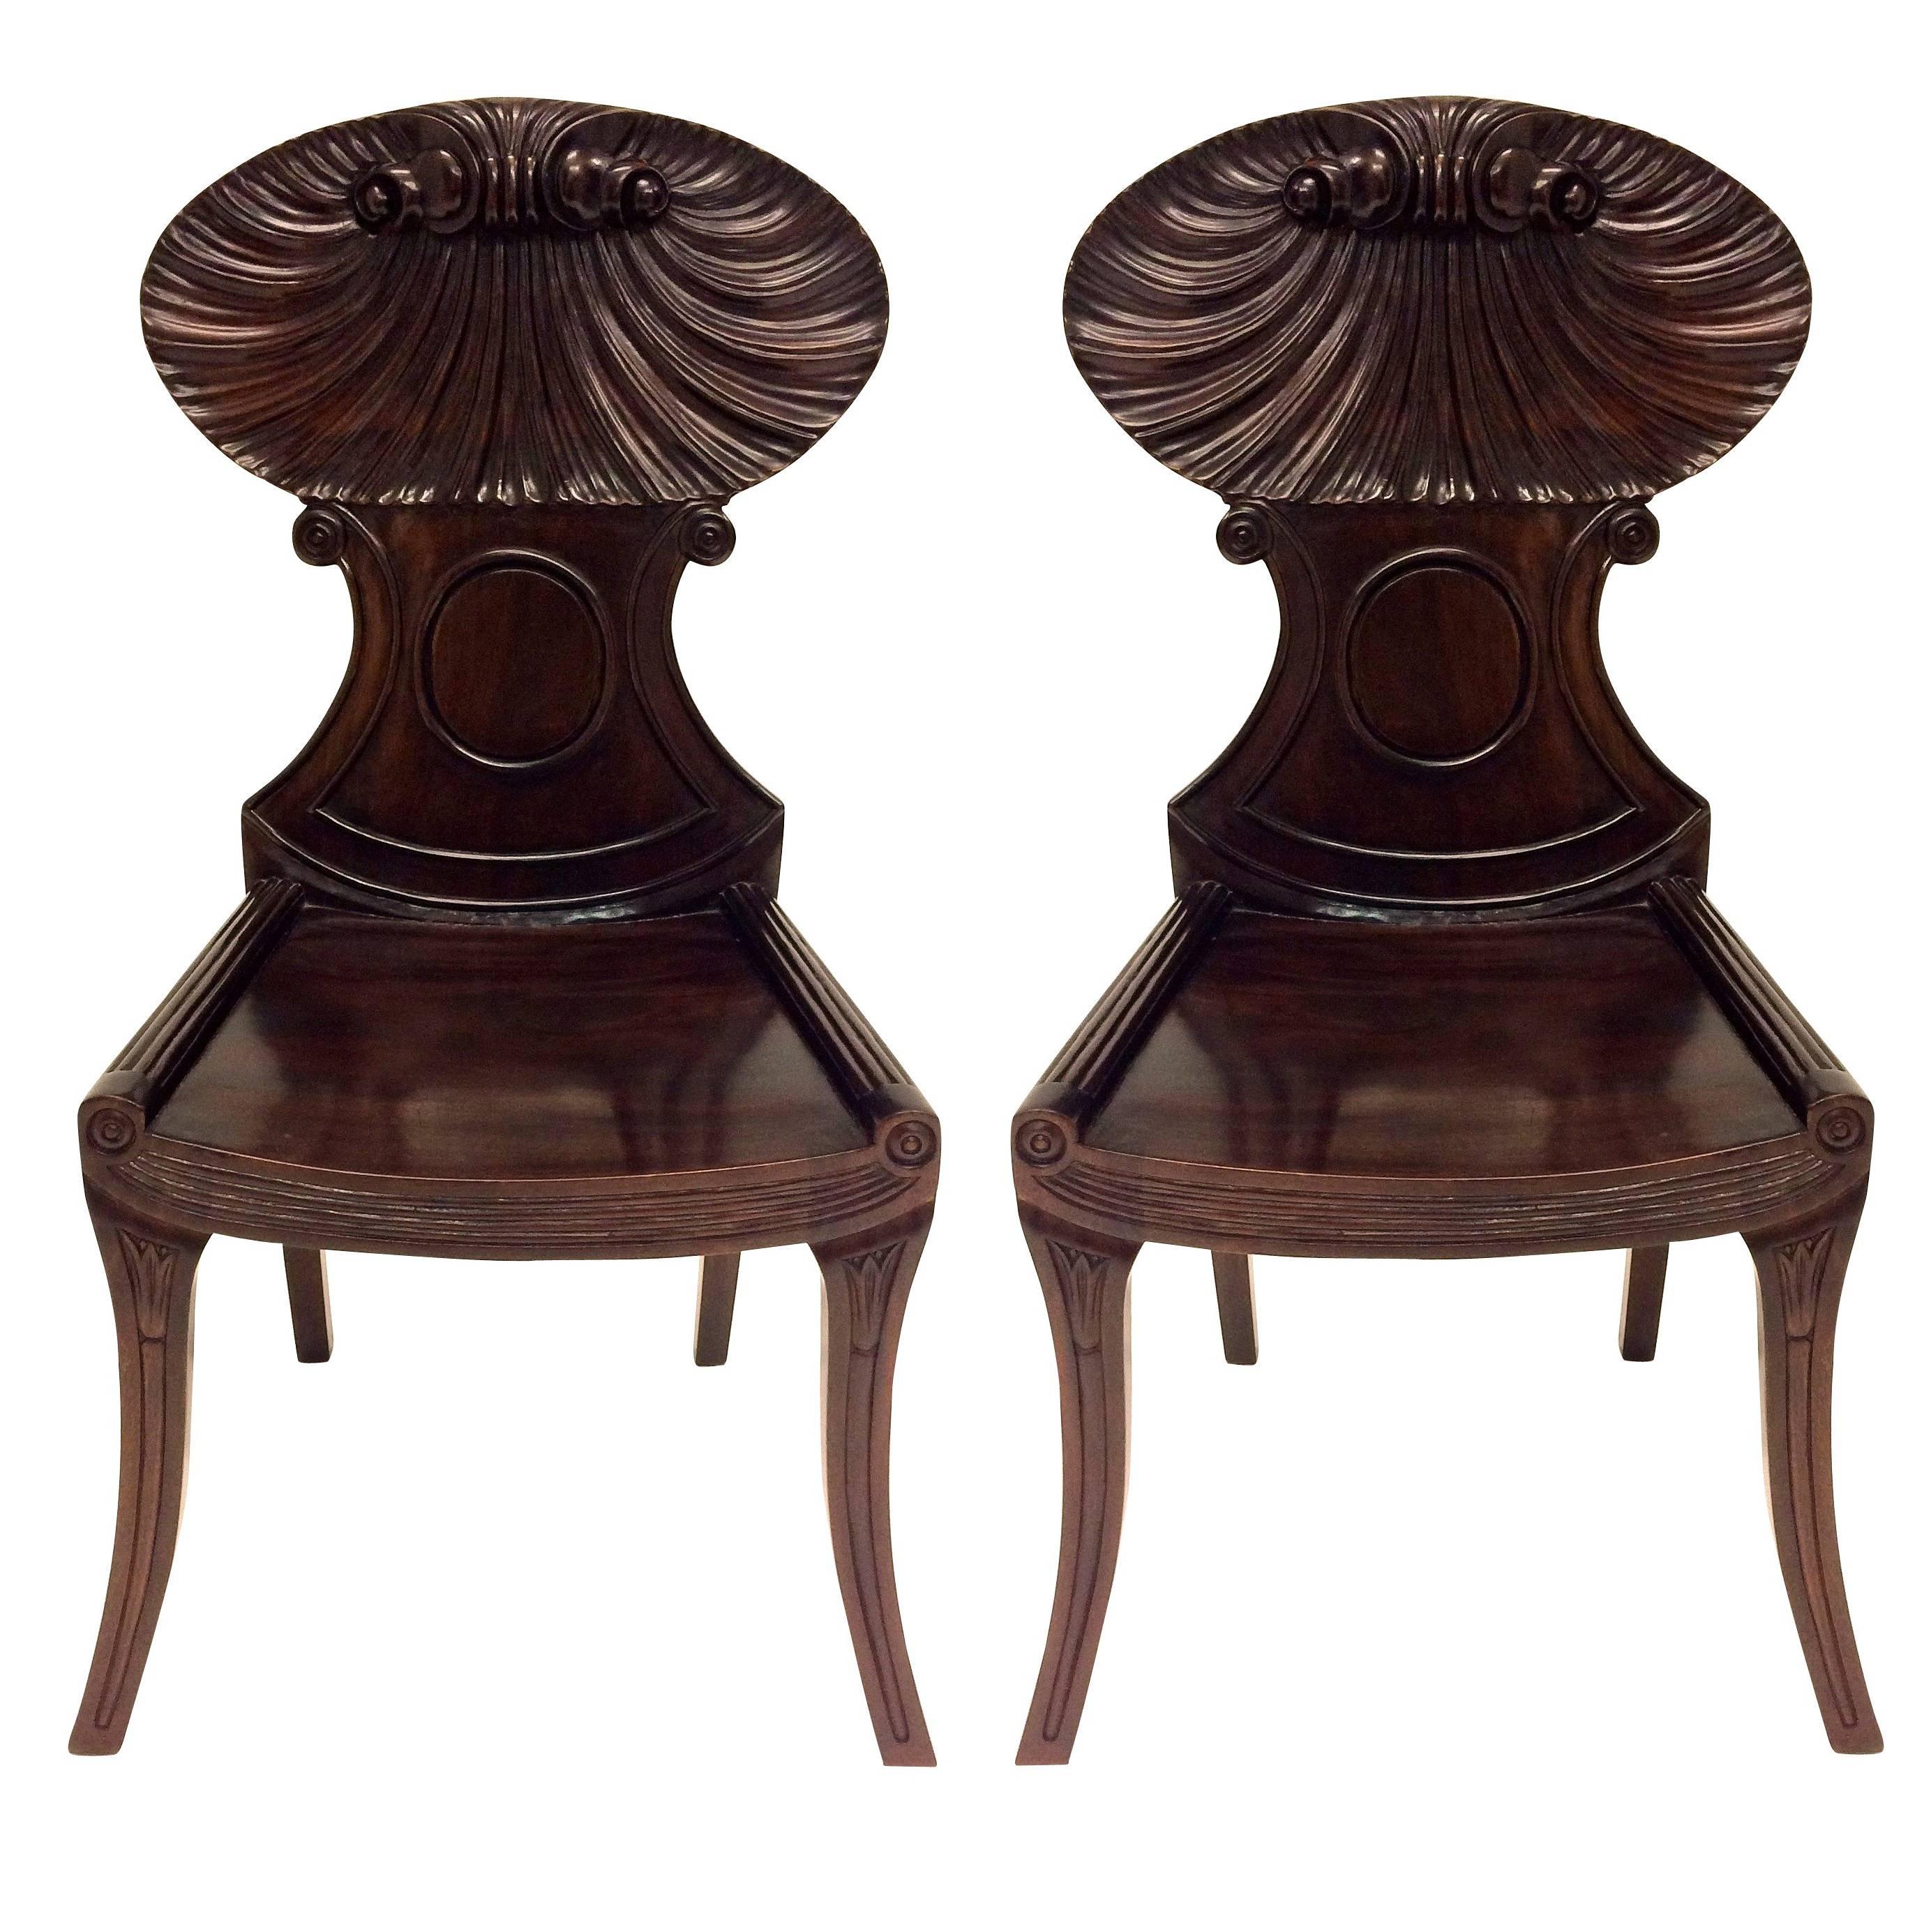 Pair of Large English Regency Style Mahogany Hall Chairs